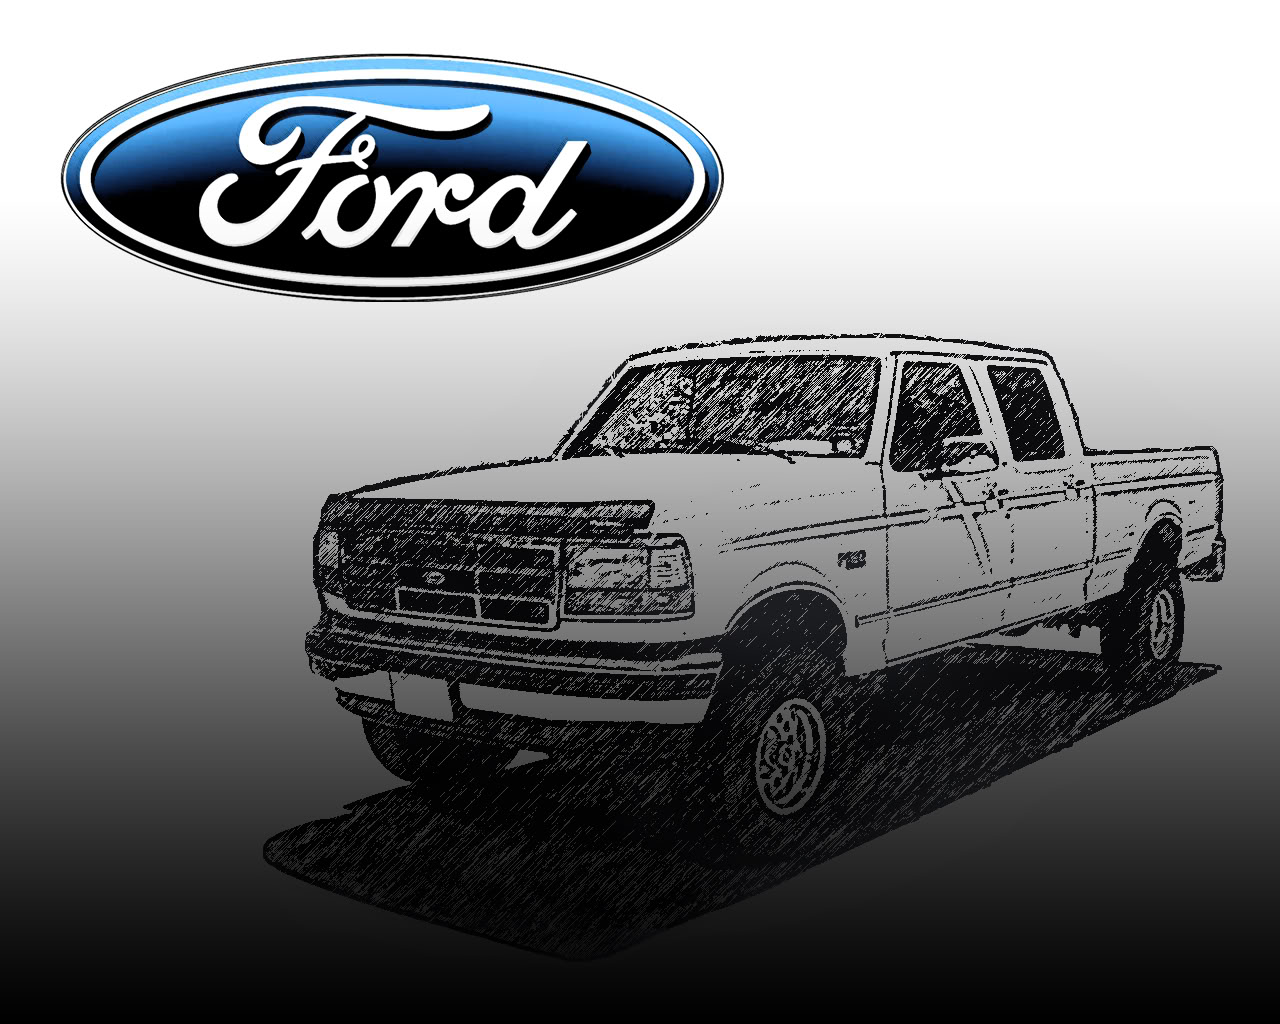 39+] Ford Truck Wallpapers